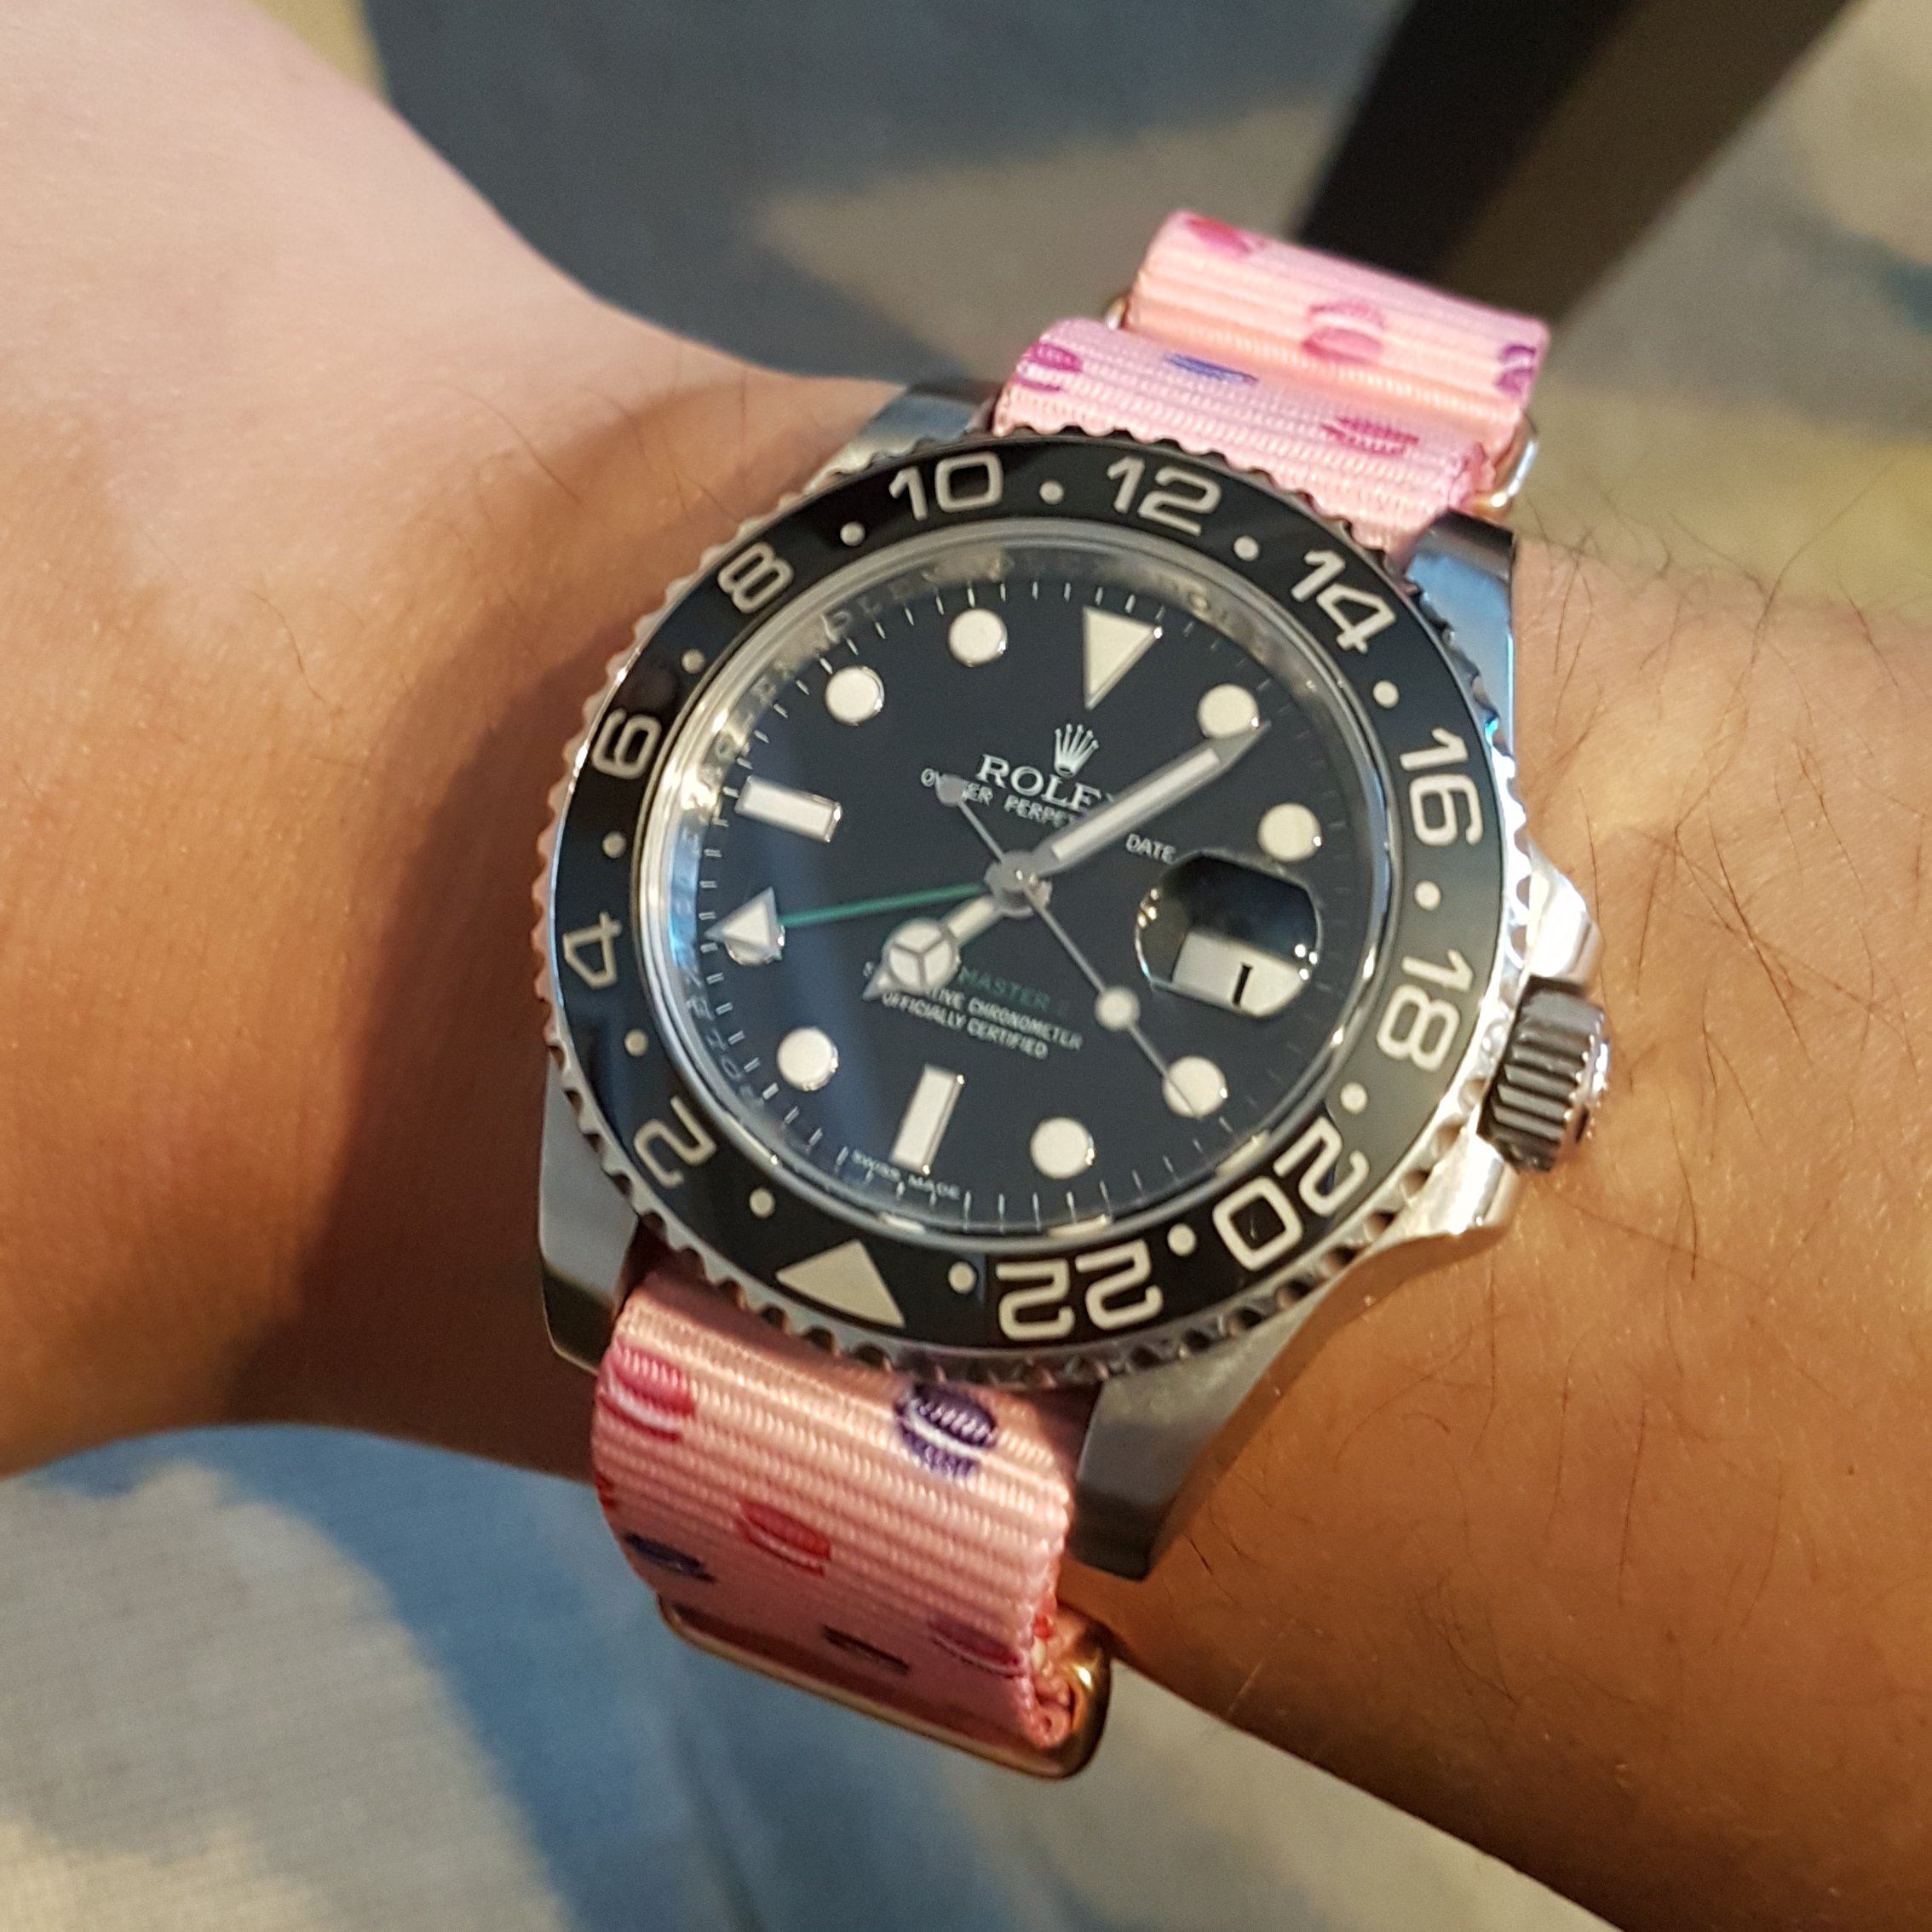 Rolex watch on Vario Macaron Dots Graphic strap by #varioeveryday member Phil